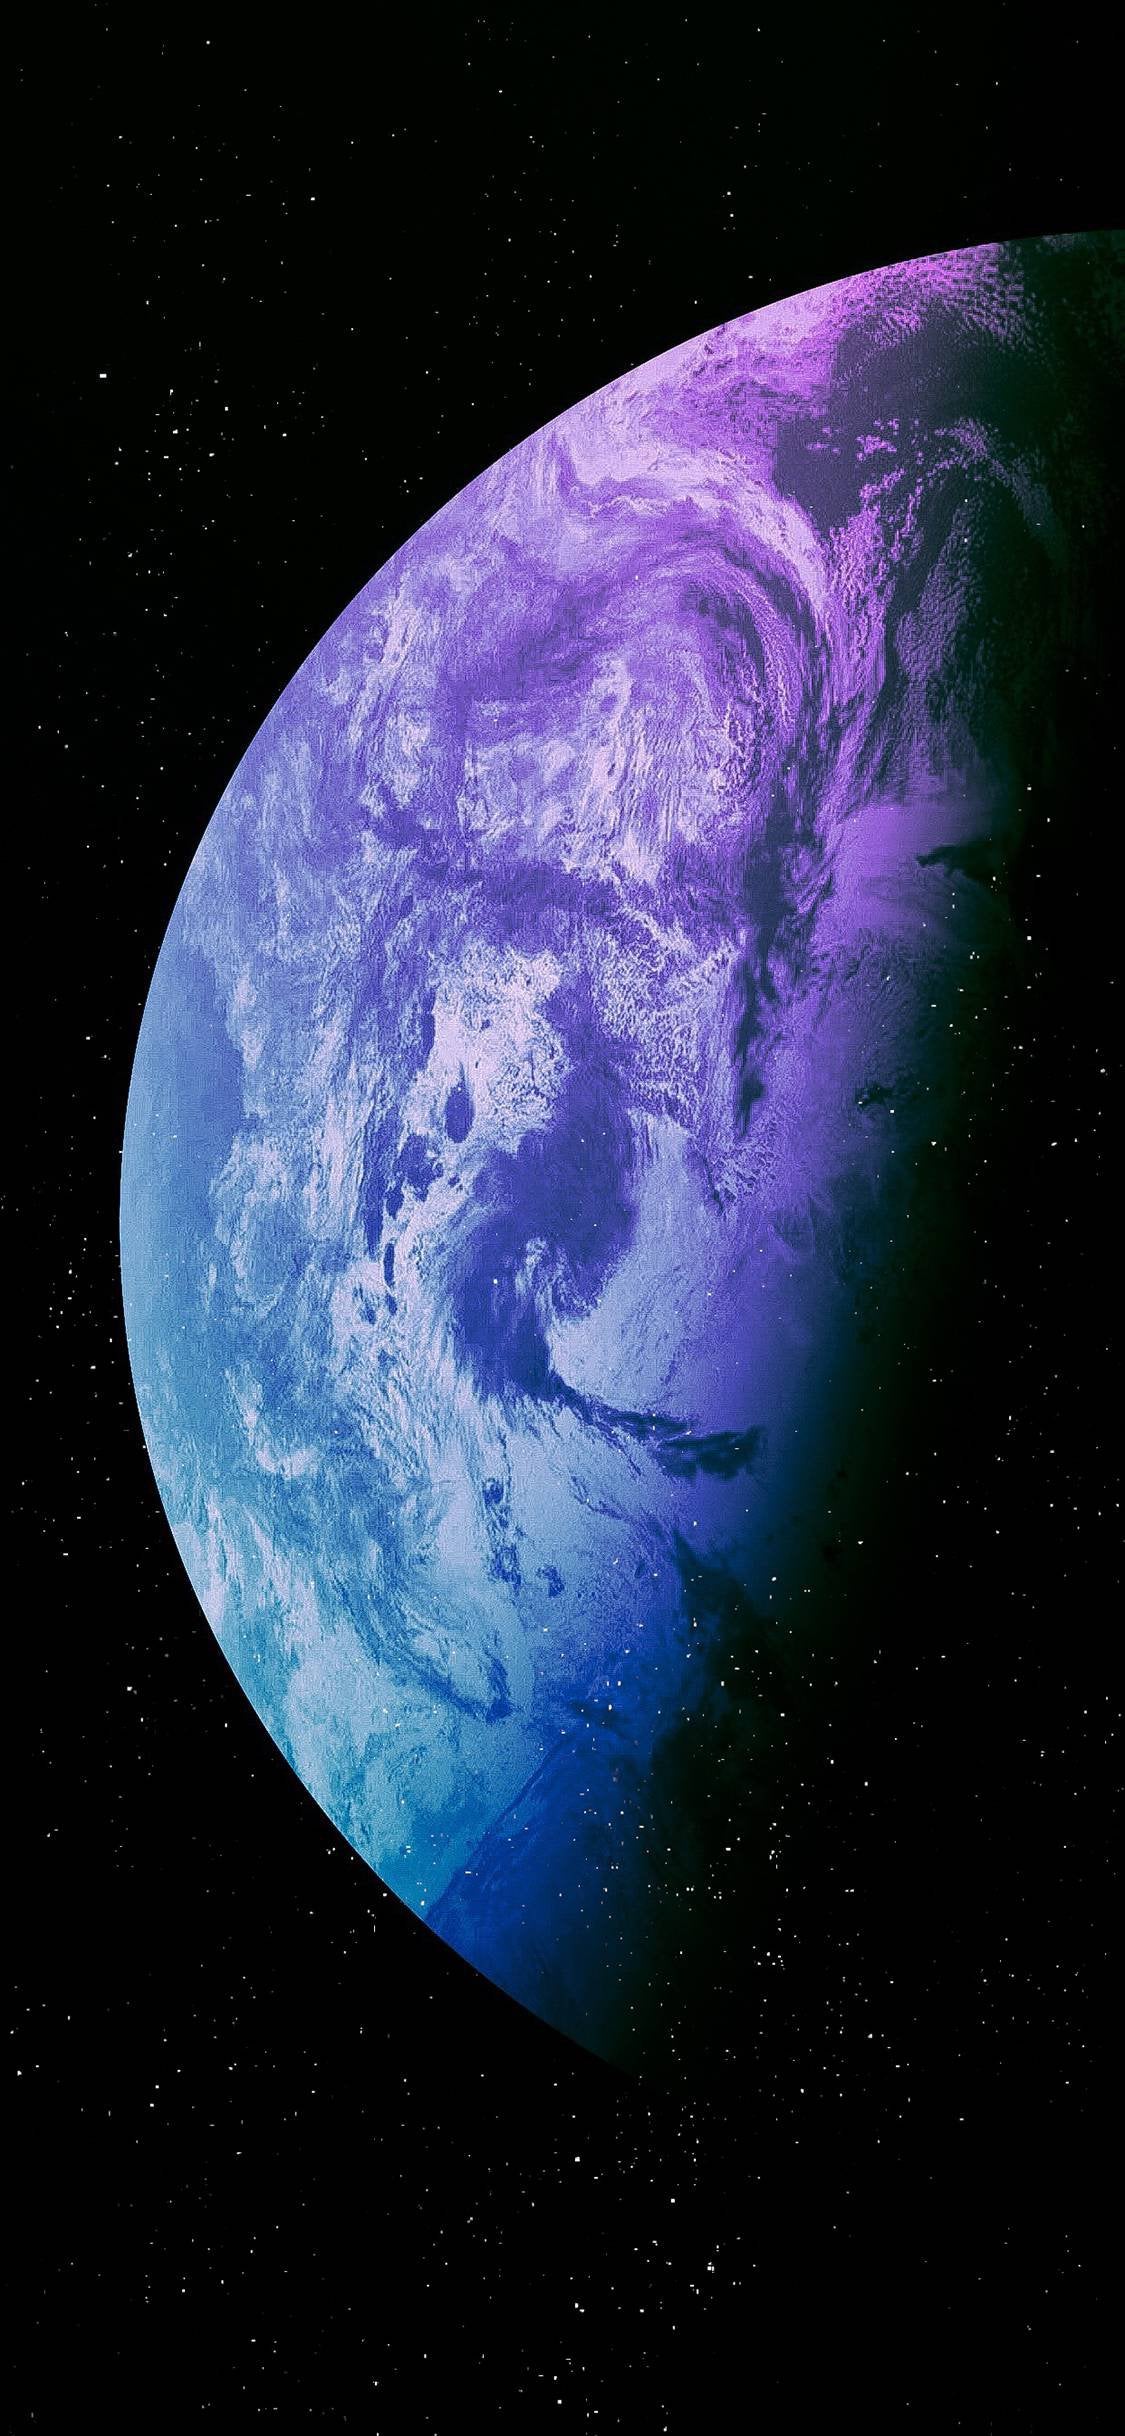 A purple and blue planet in space - Earth